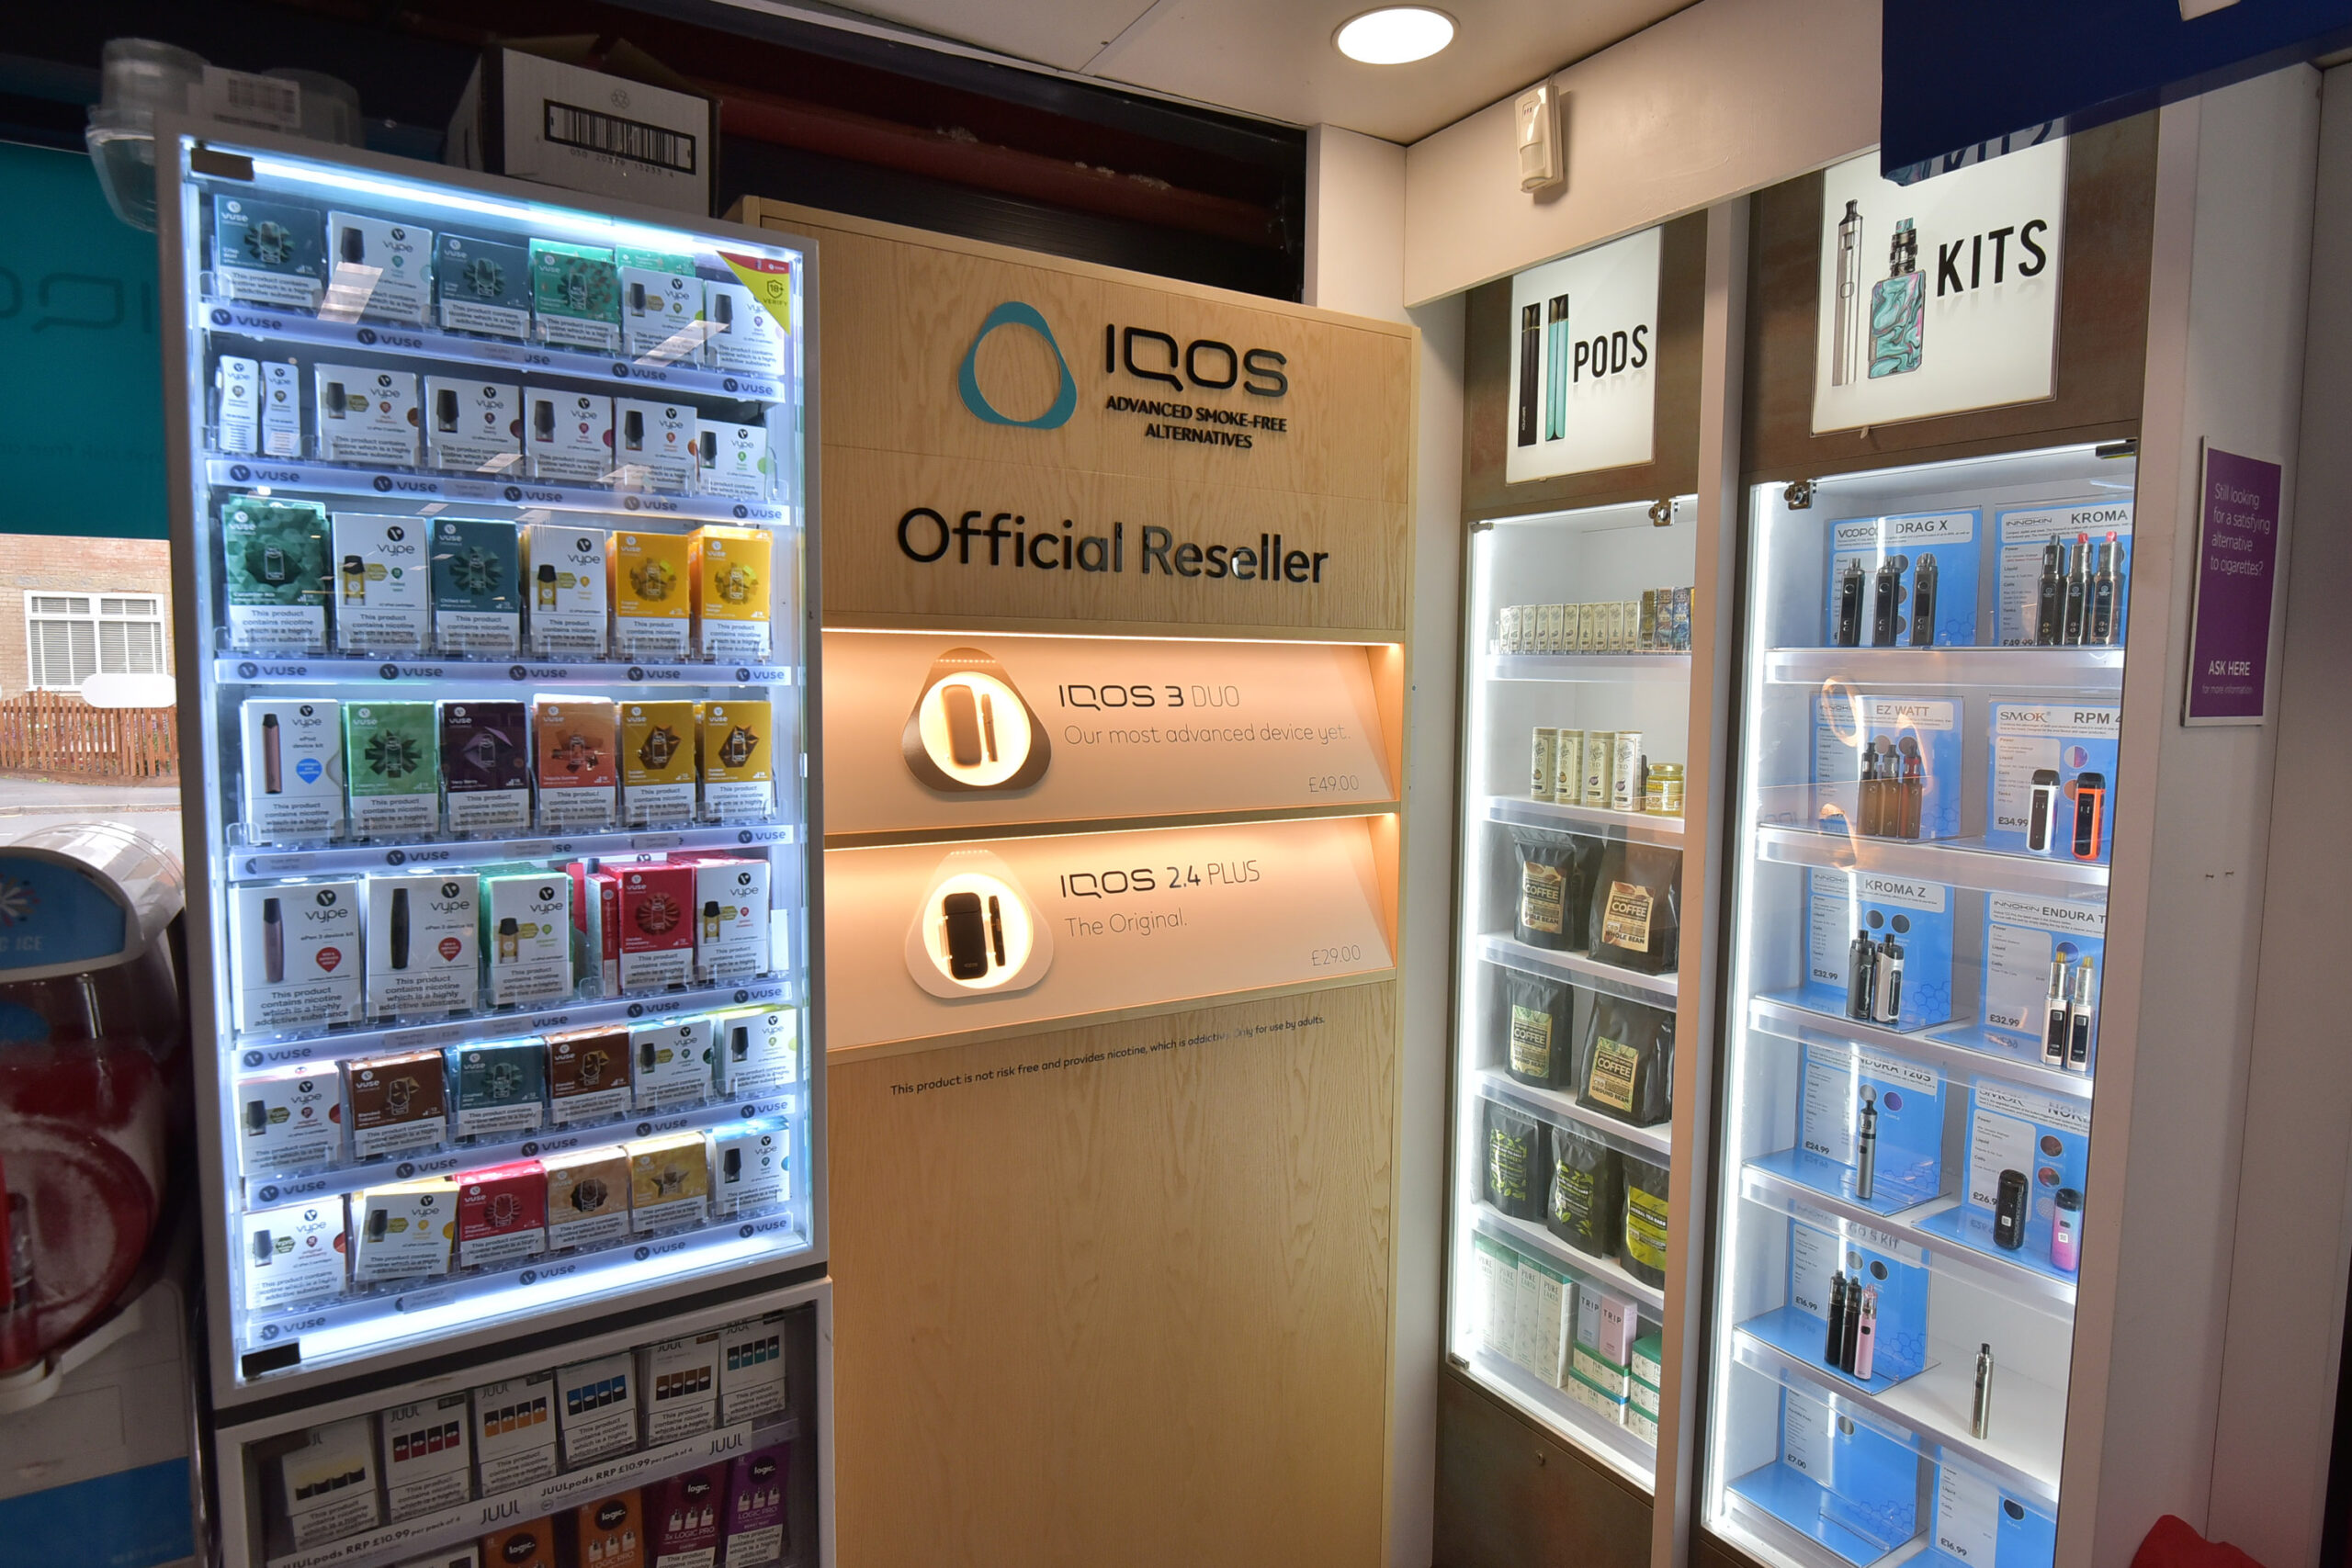 Philip Morris Limited invests in vape retailers